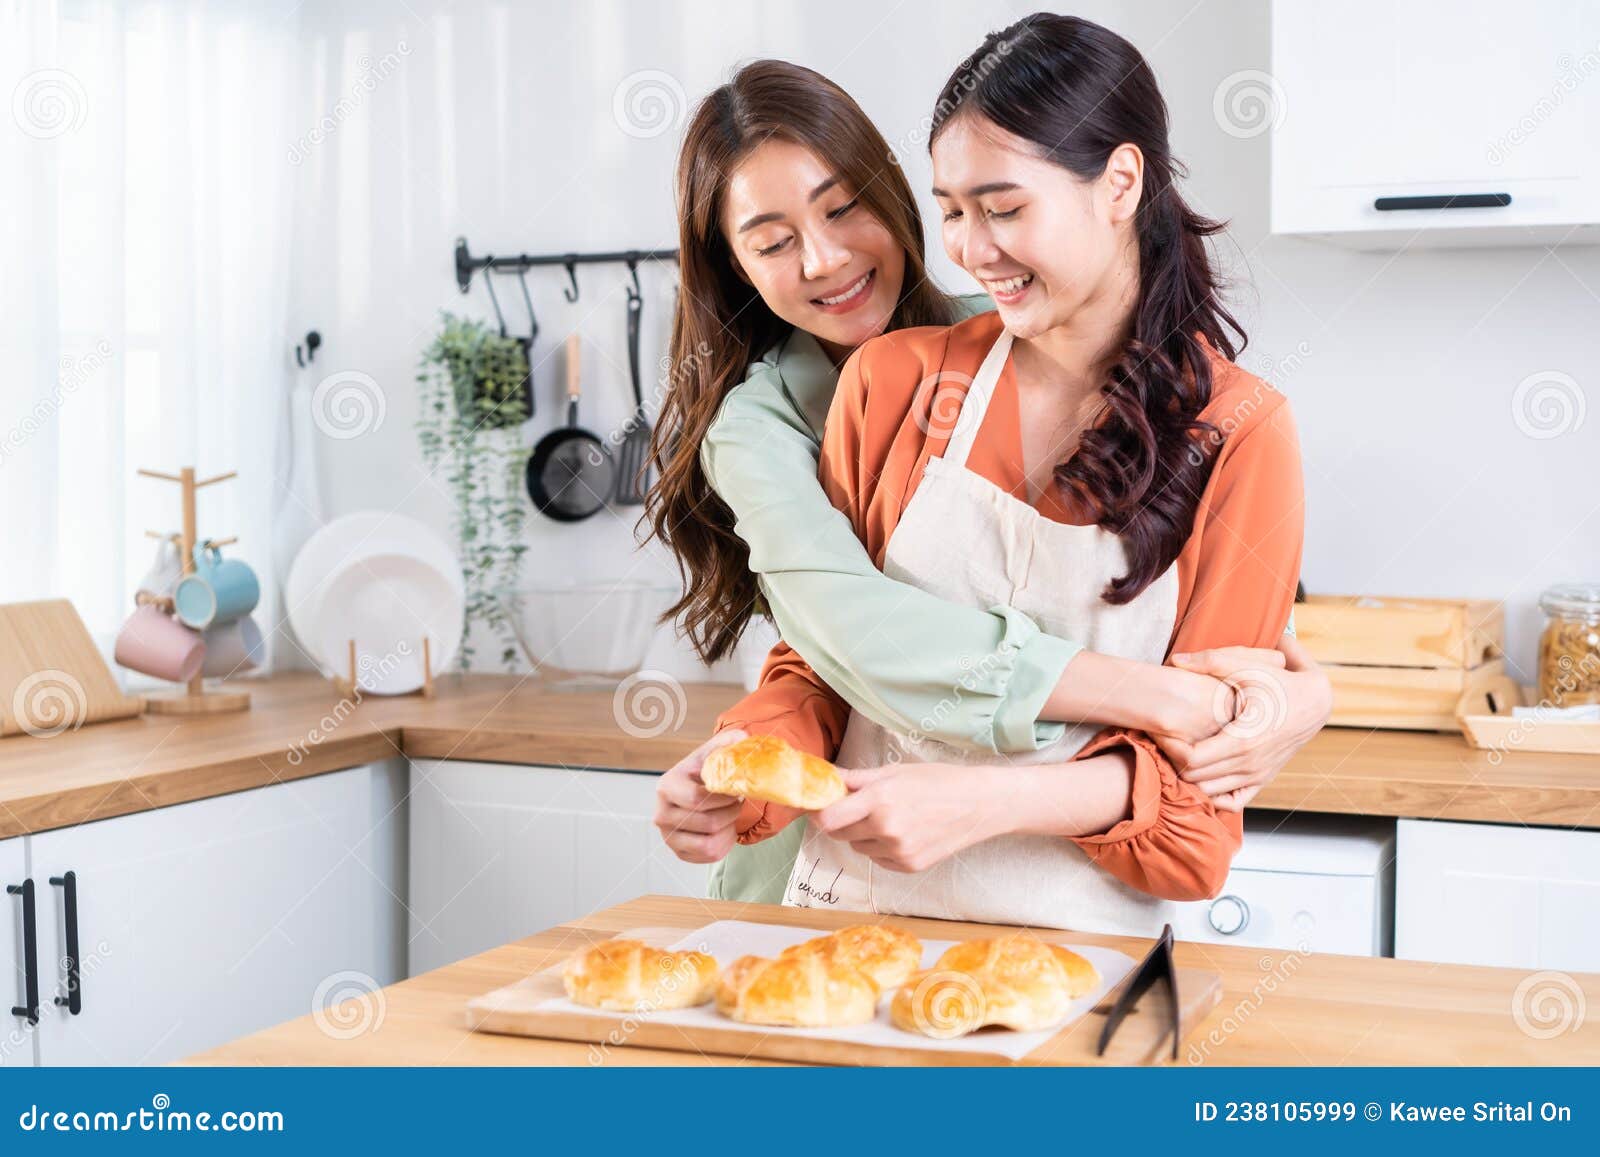 Asian Beautiful Lesbian Woman Couple Look At Girlfriend Bake Croissant Attractive Two Female